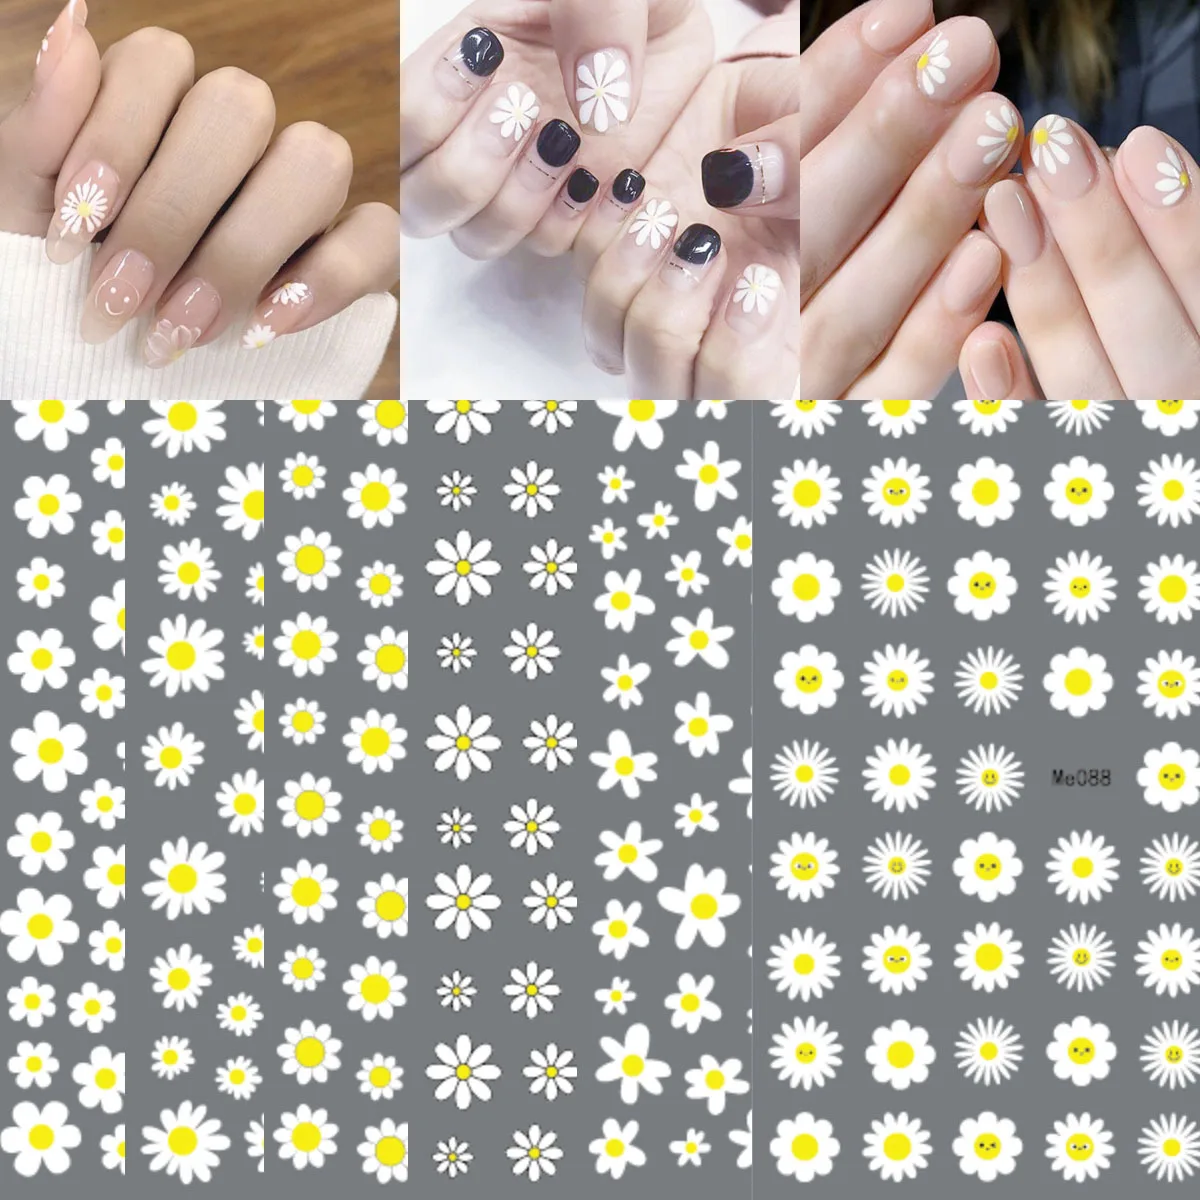 

1Pcs Daisy Nail Stickers Sunflower Spring Decoration Flowers Leaf Nail Decals Rose Tattoo Cherry Blossom Sliders For Manicure